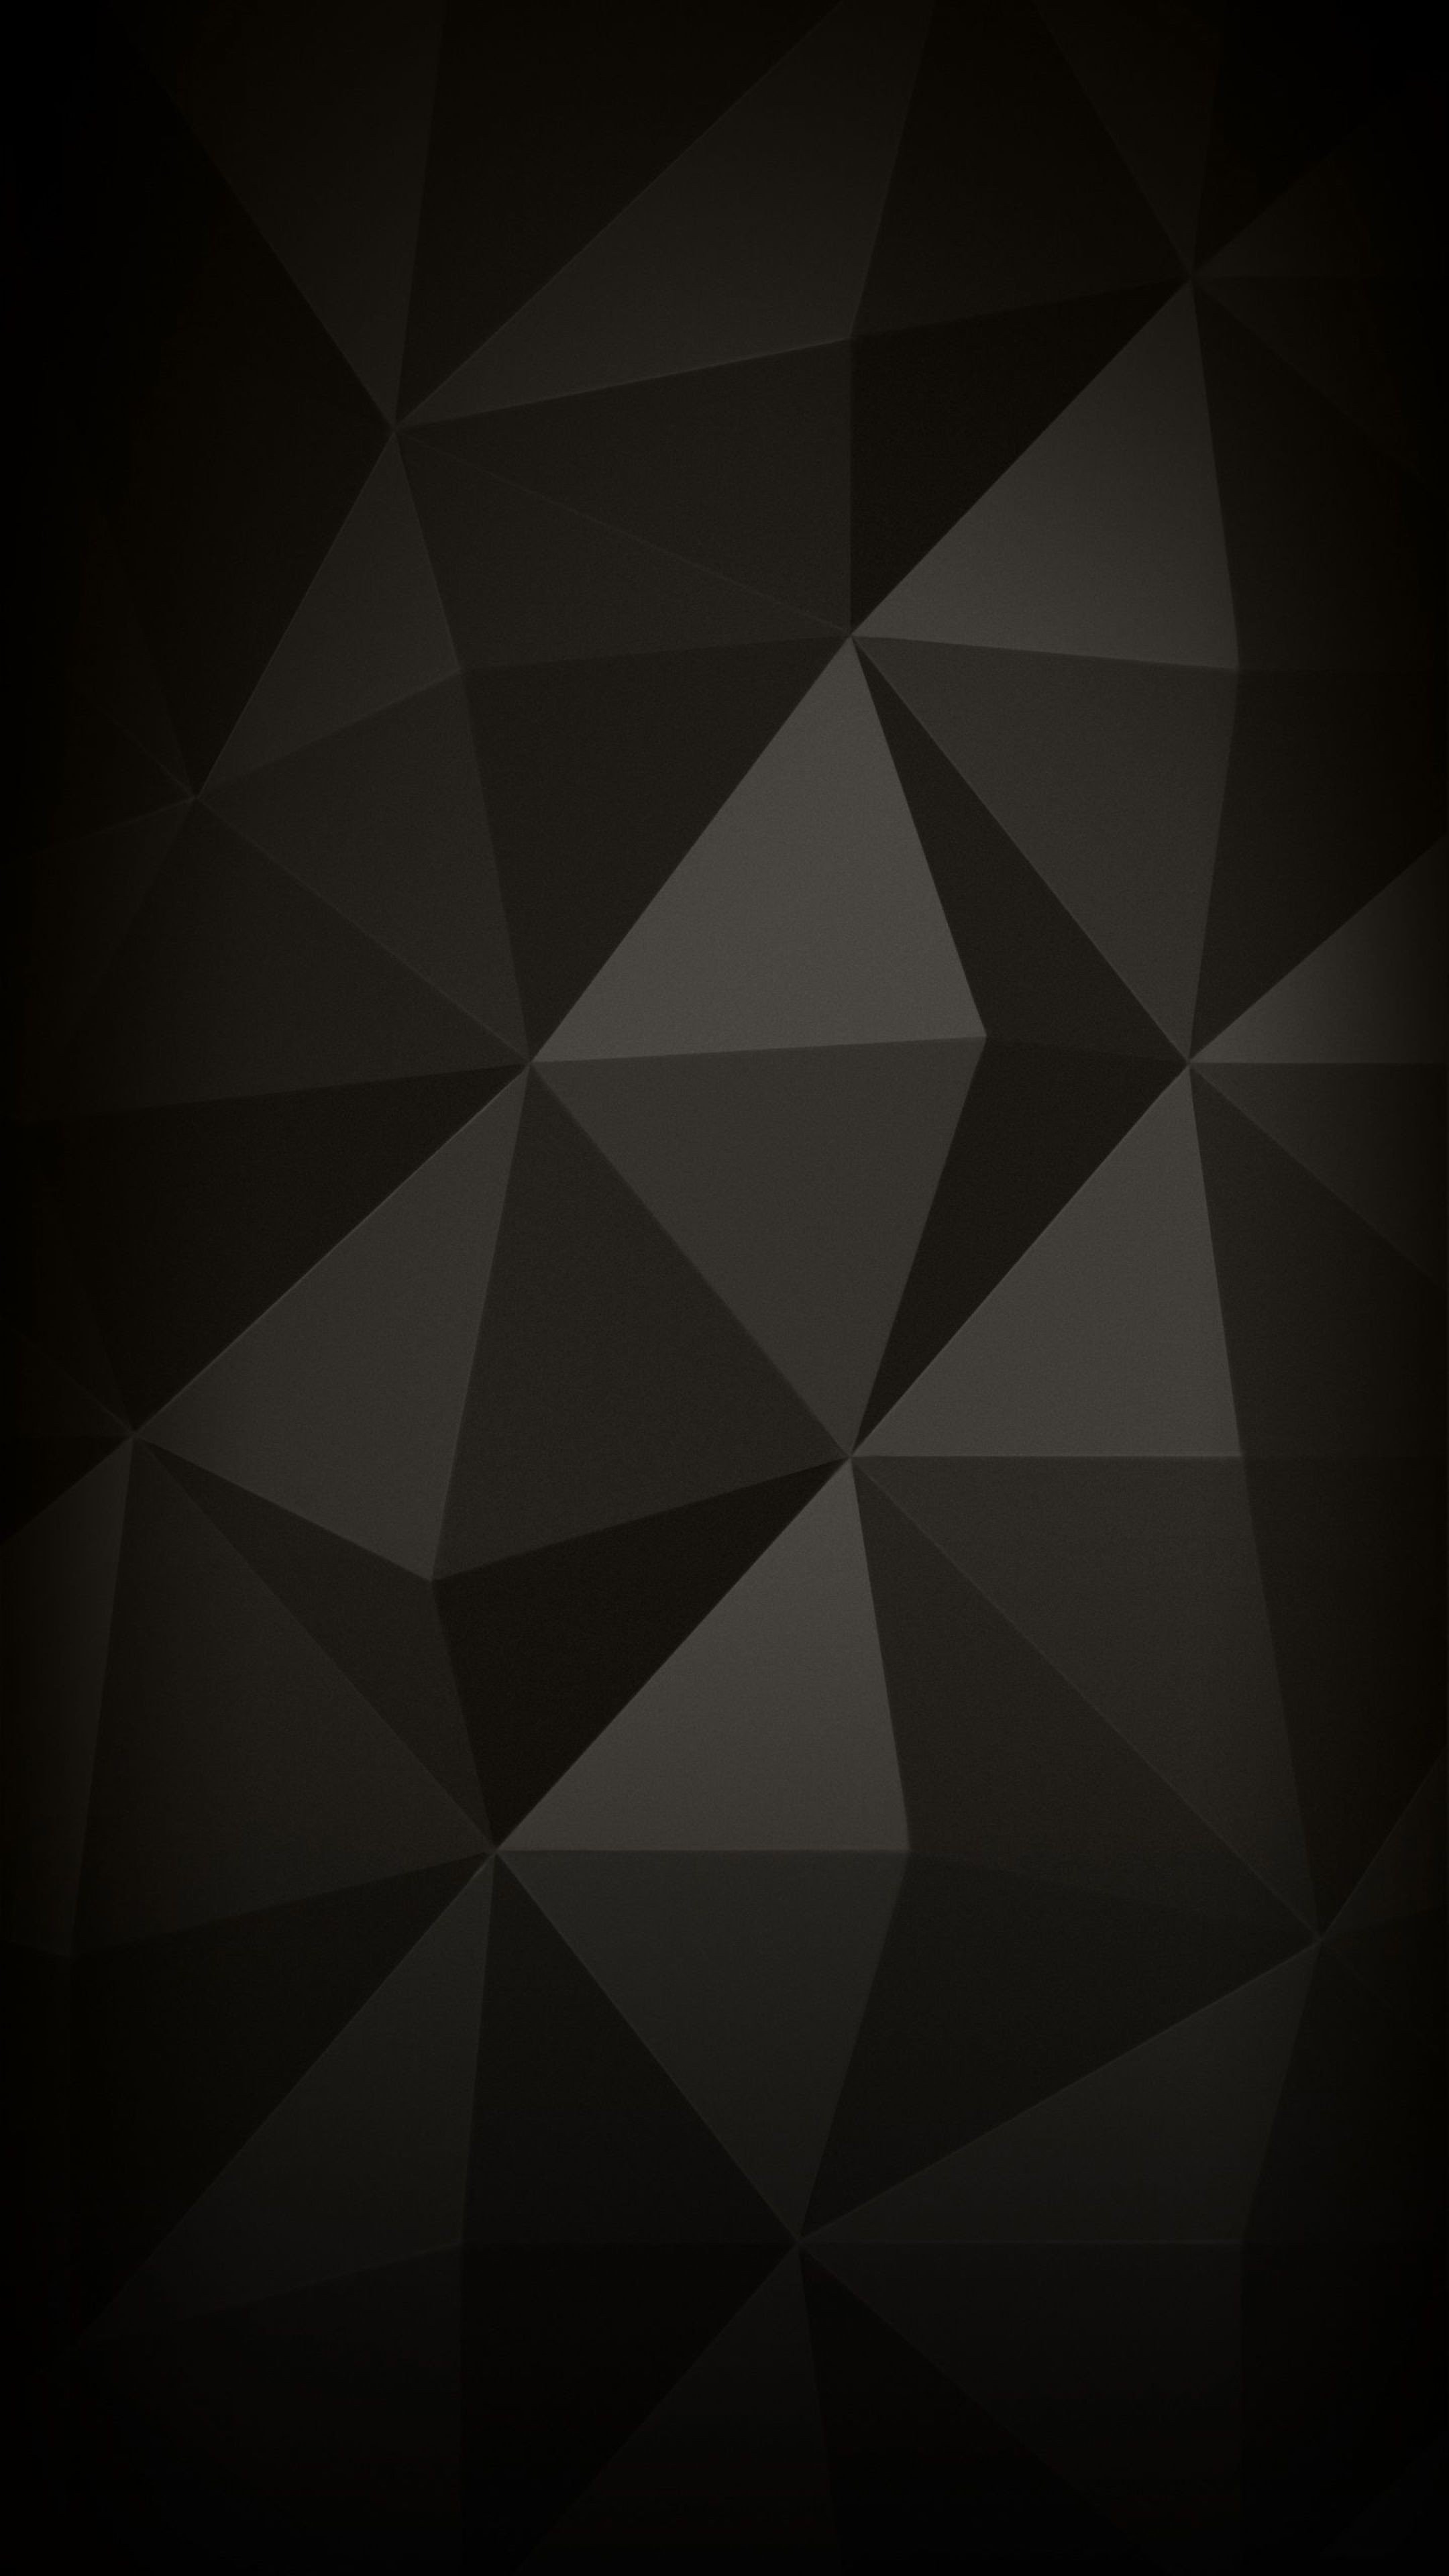 Ultra HD 4K black abstract mobile phone wallpaper 1 2160x3840 Samsung Apple iPhone LG HTC Mobile